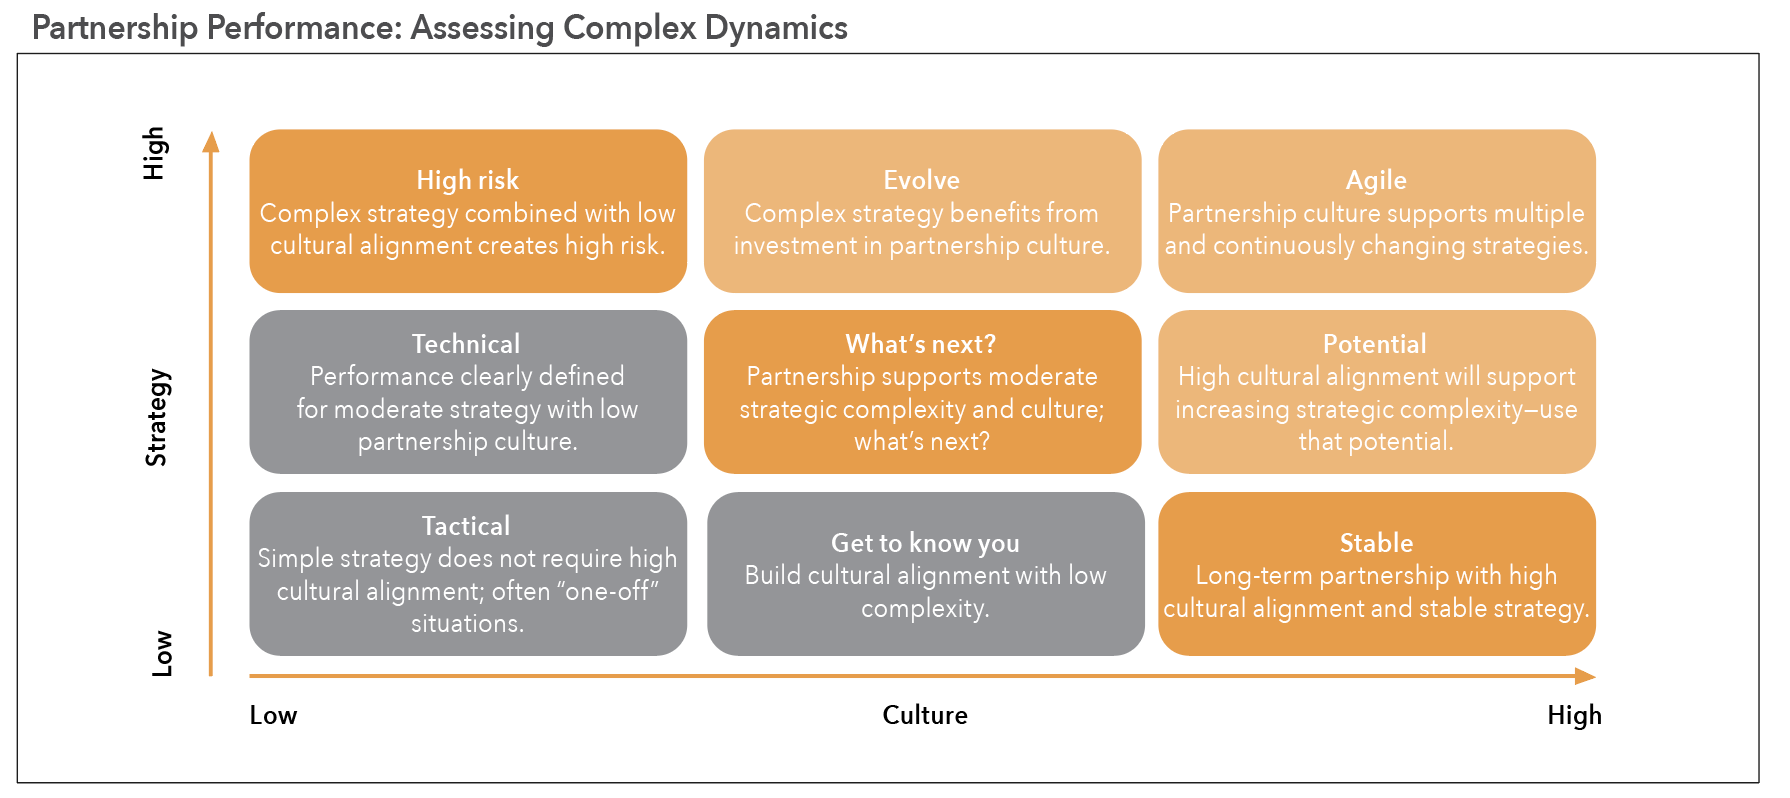 Figure 1. The nine-box model for performance assessment adapted to sponsor/vendor relationships.

Source: ICON plc